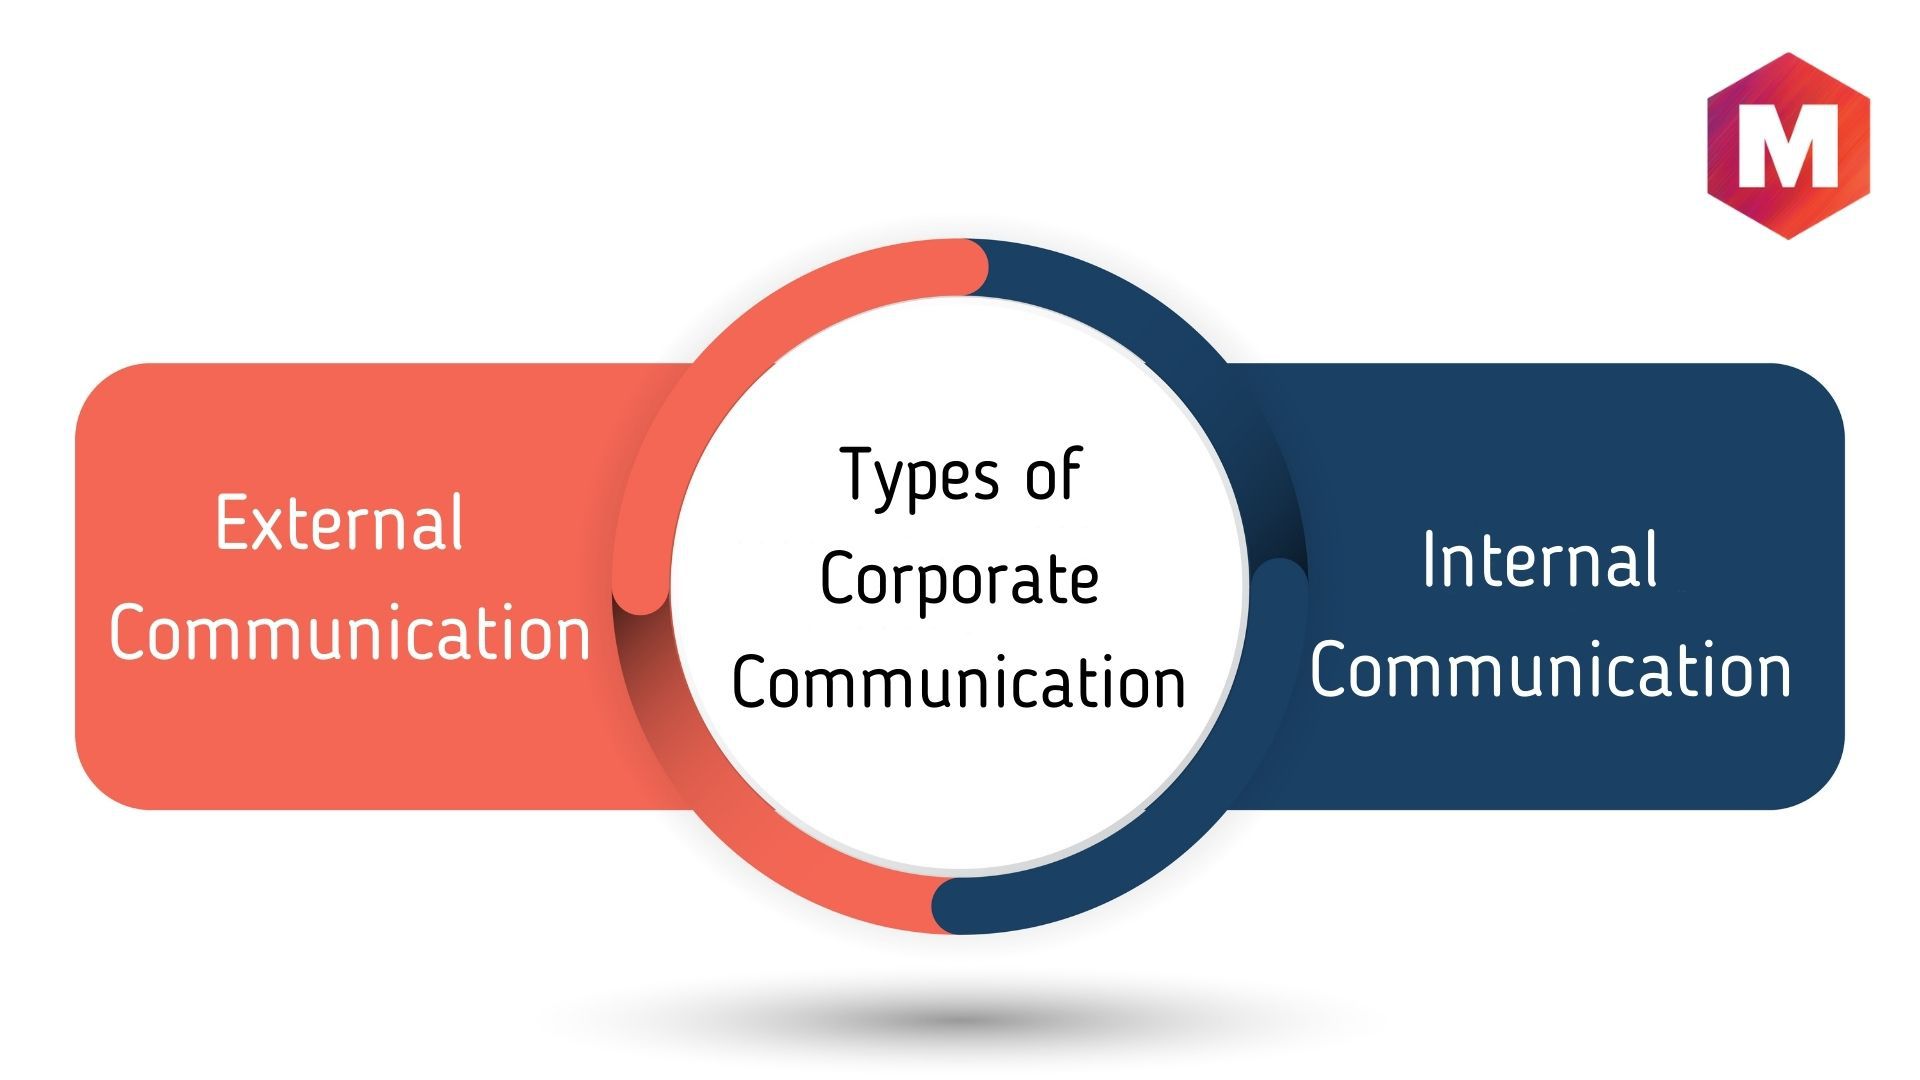 Types of Corporate Communication